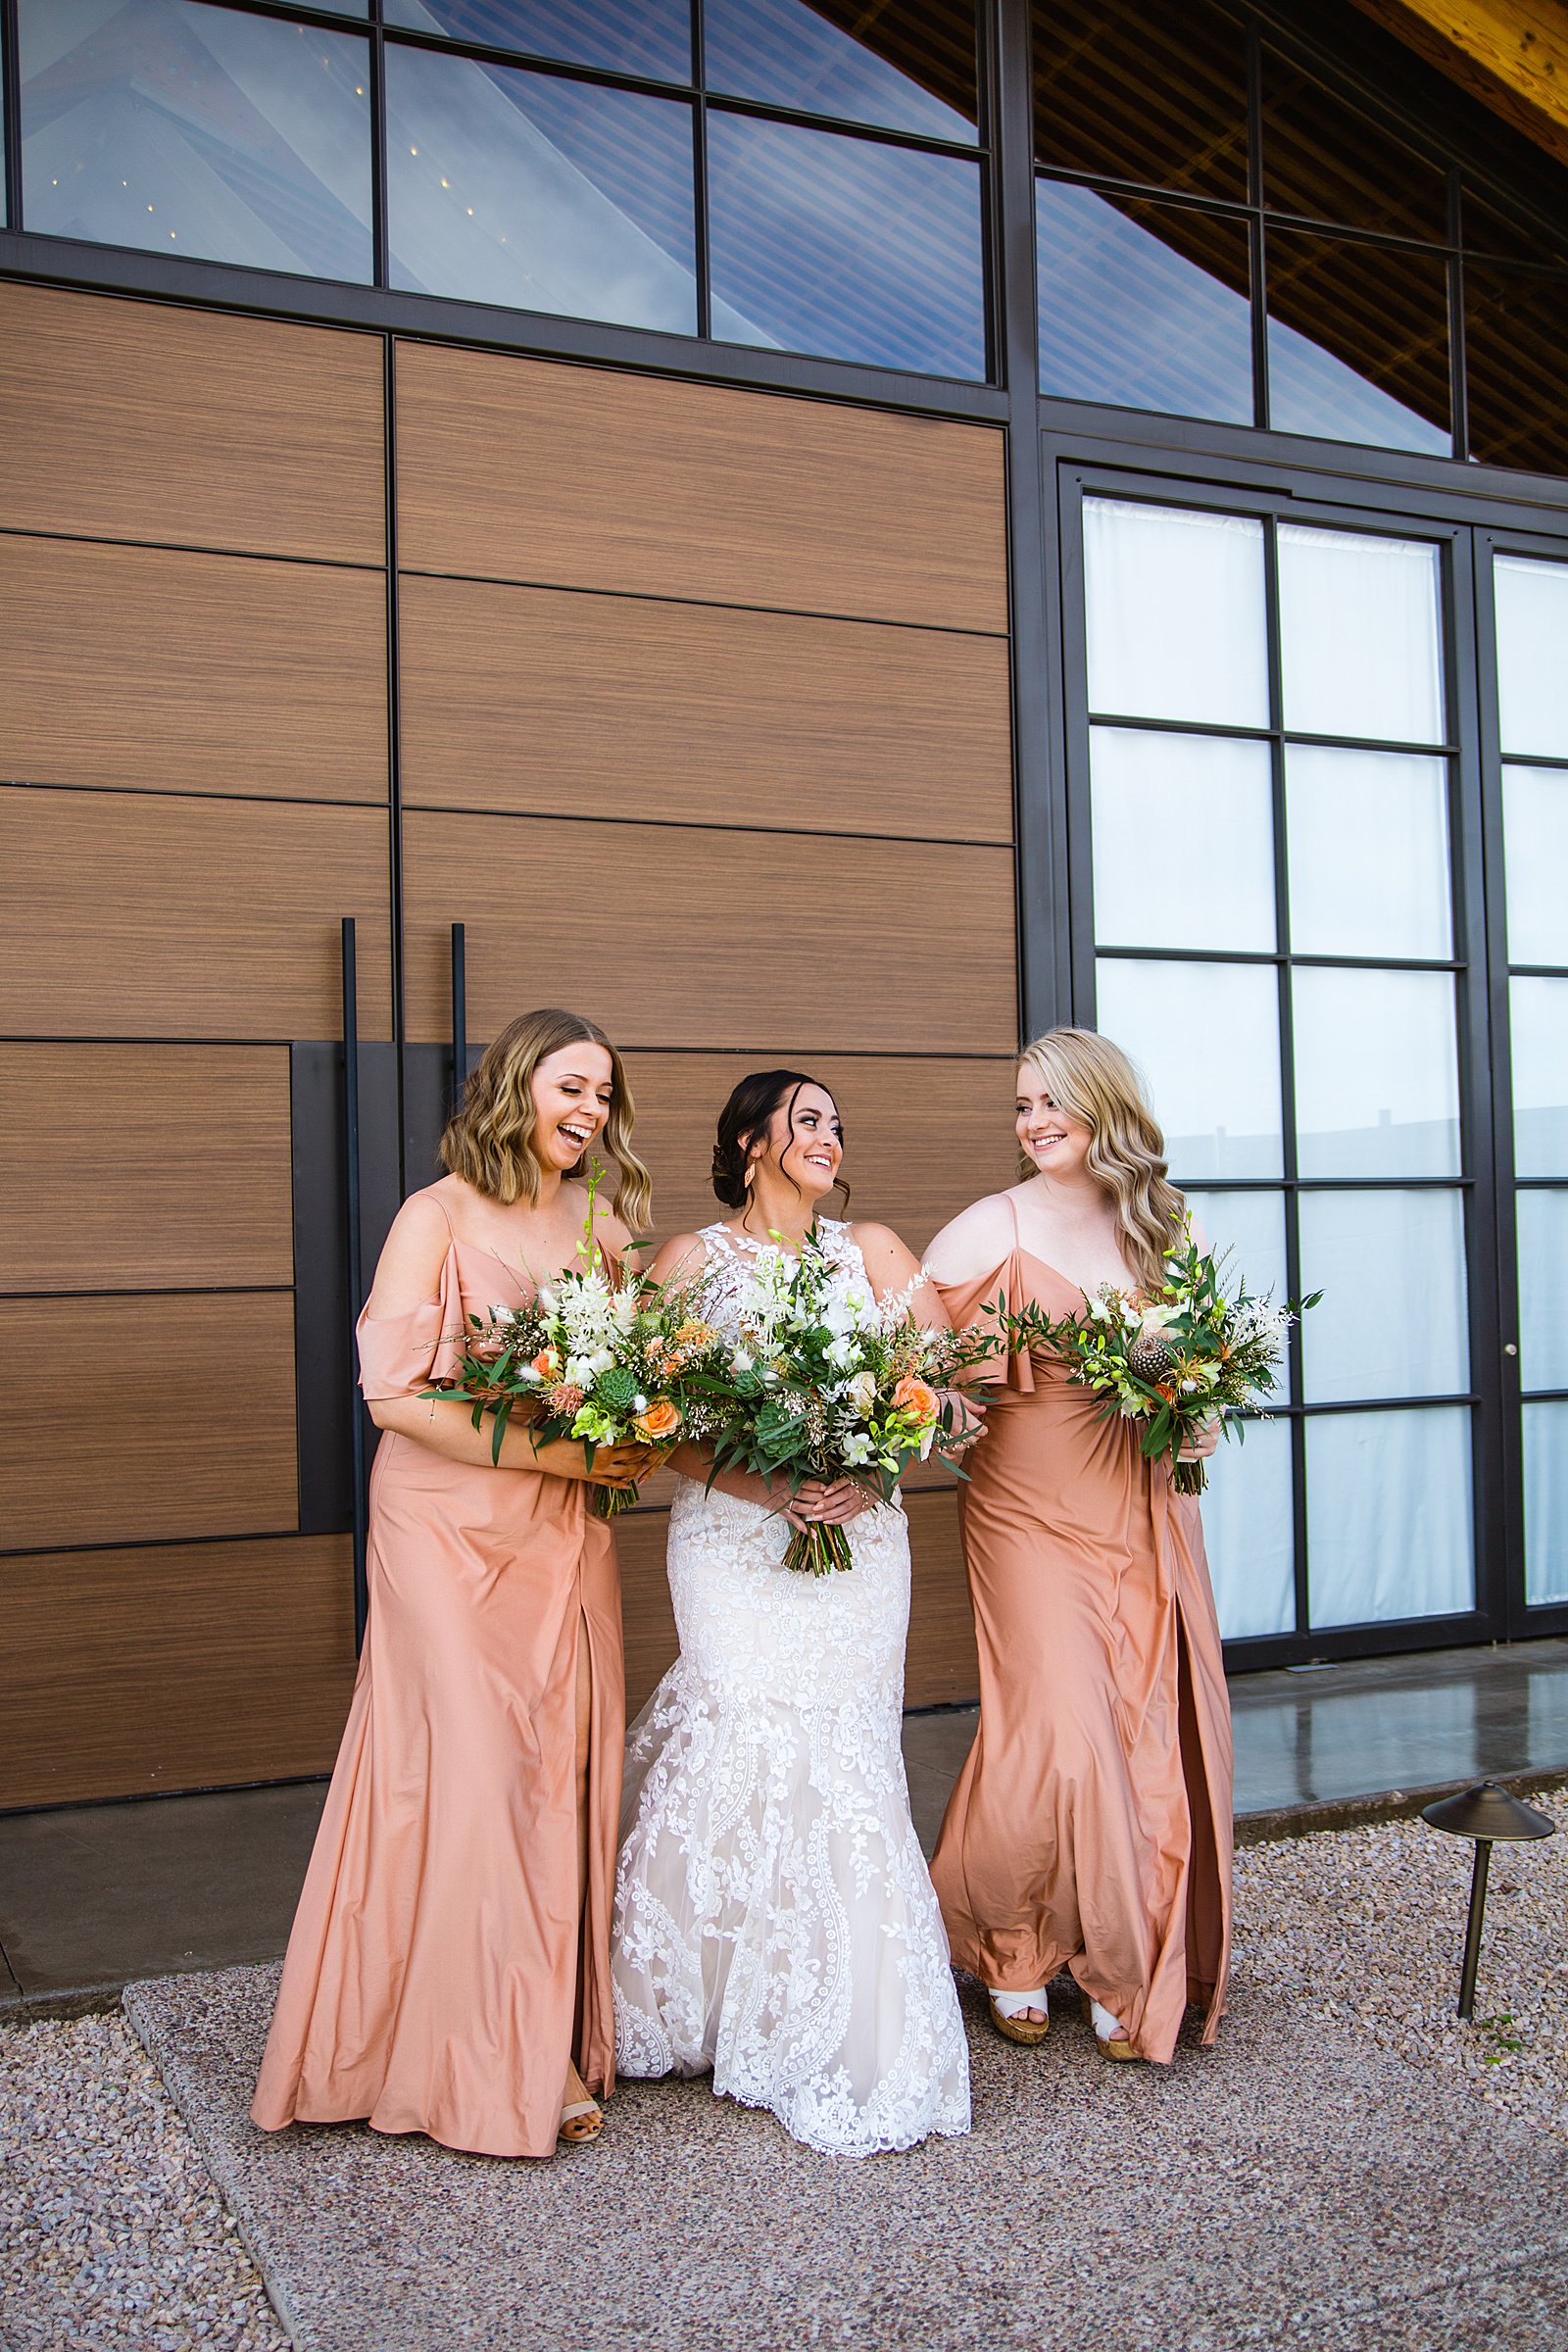 Bride and bridesmaids laughing together at The Paseo wedding by Apache Junction wedding photographer PMA Photography.